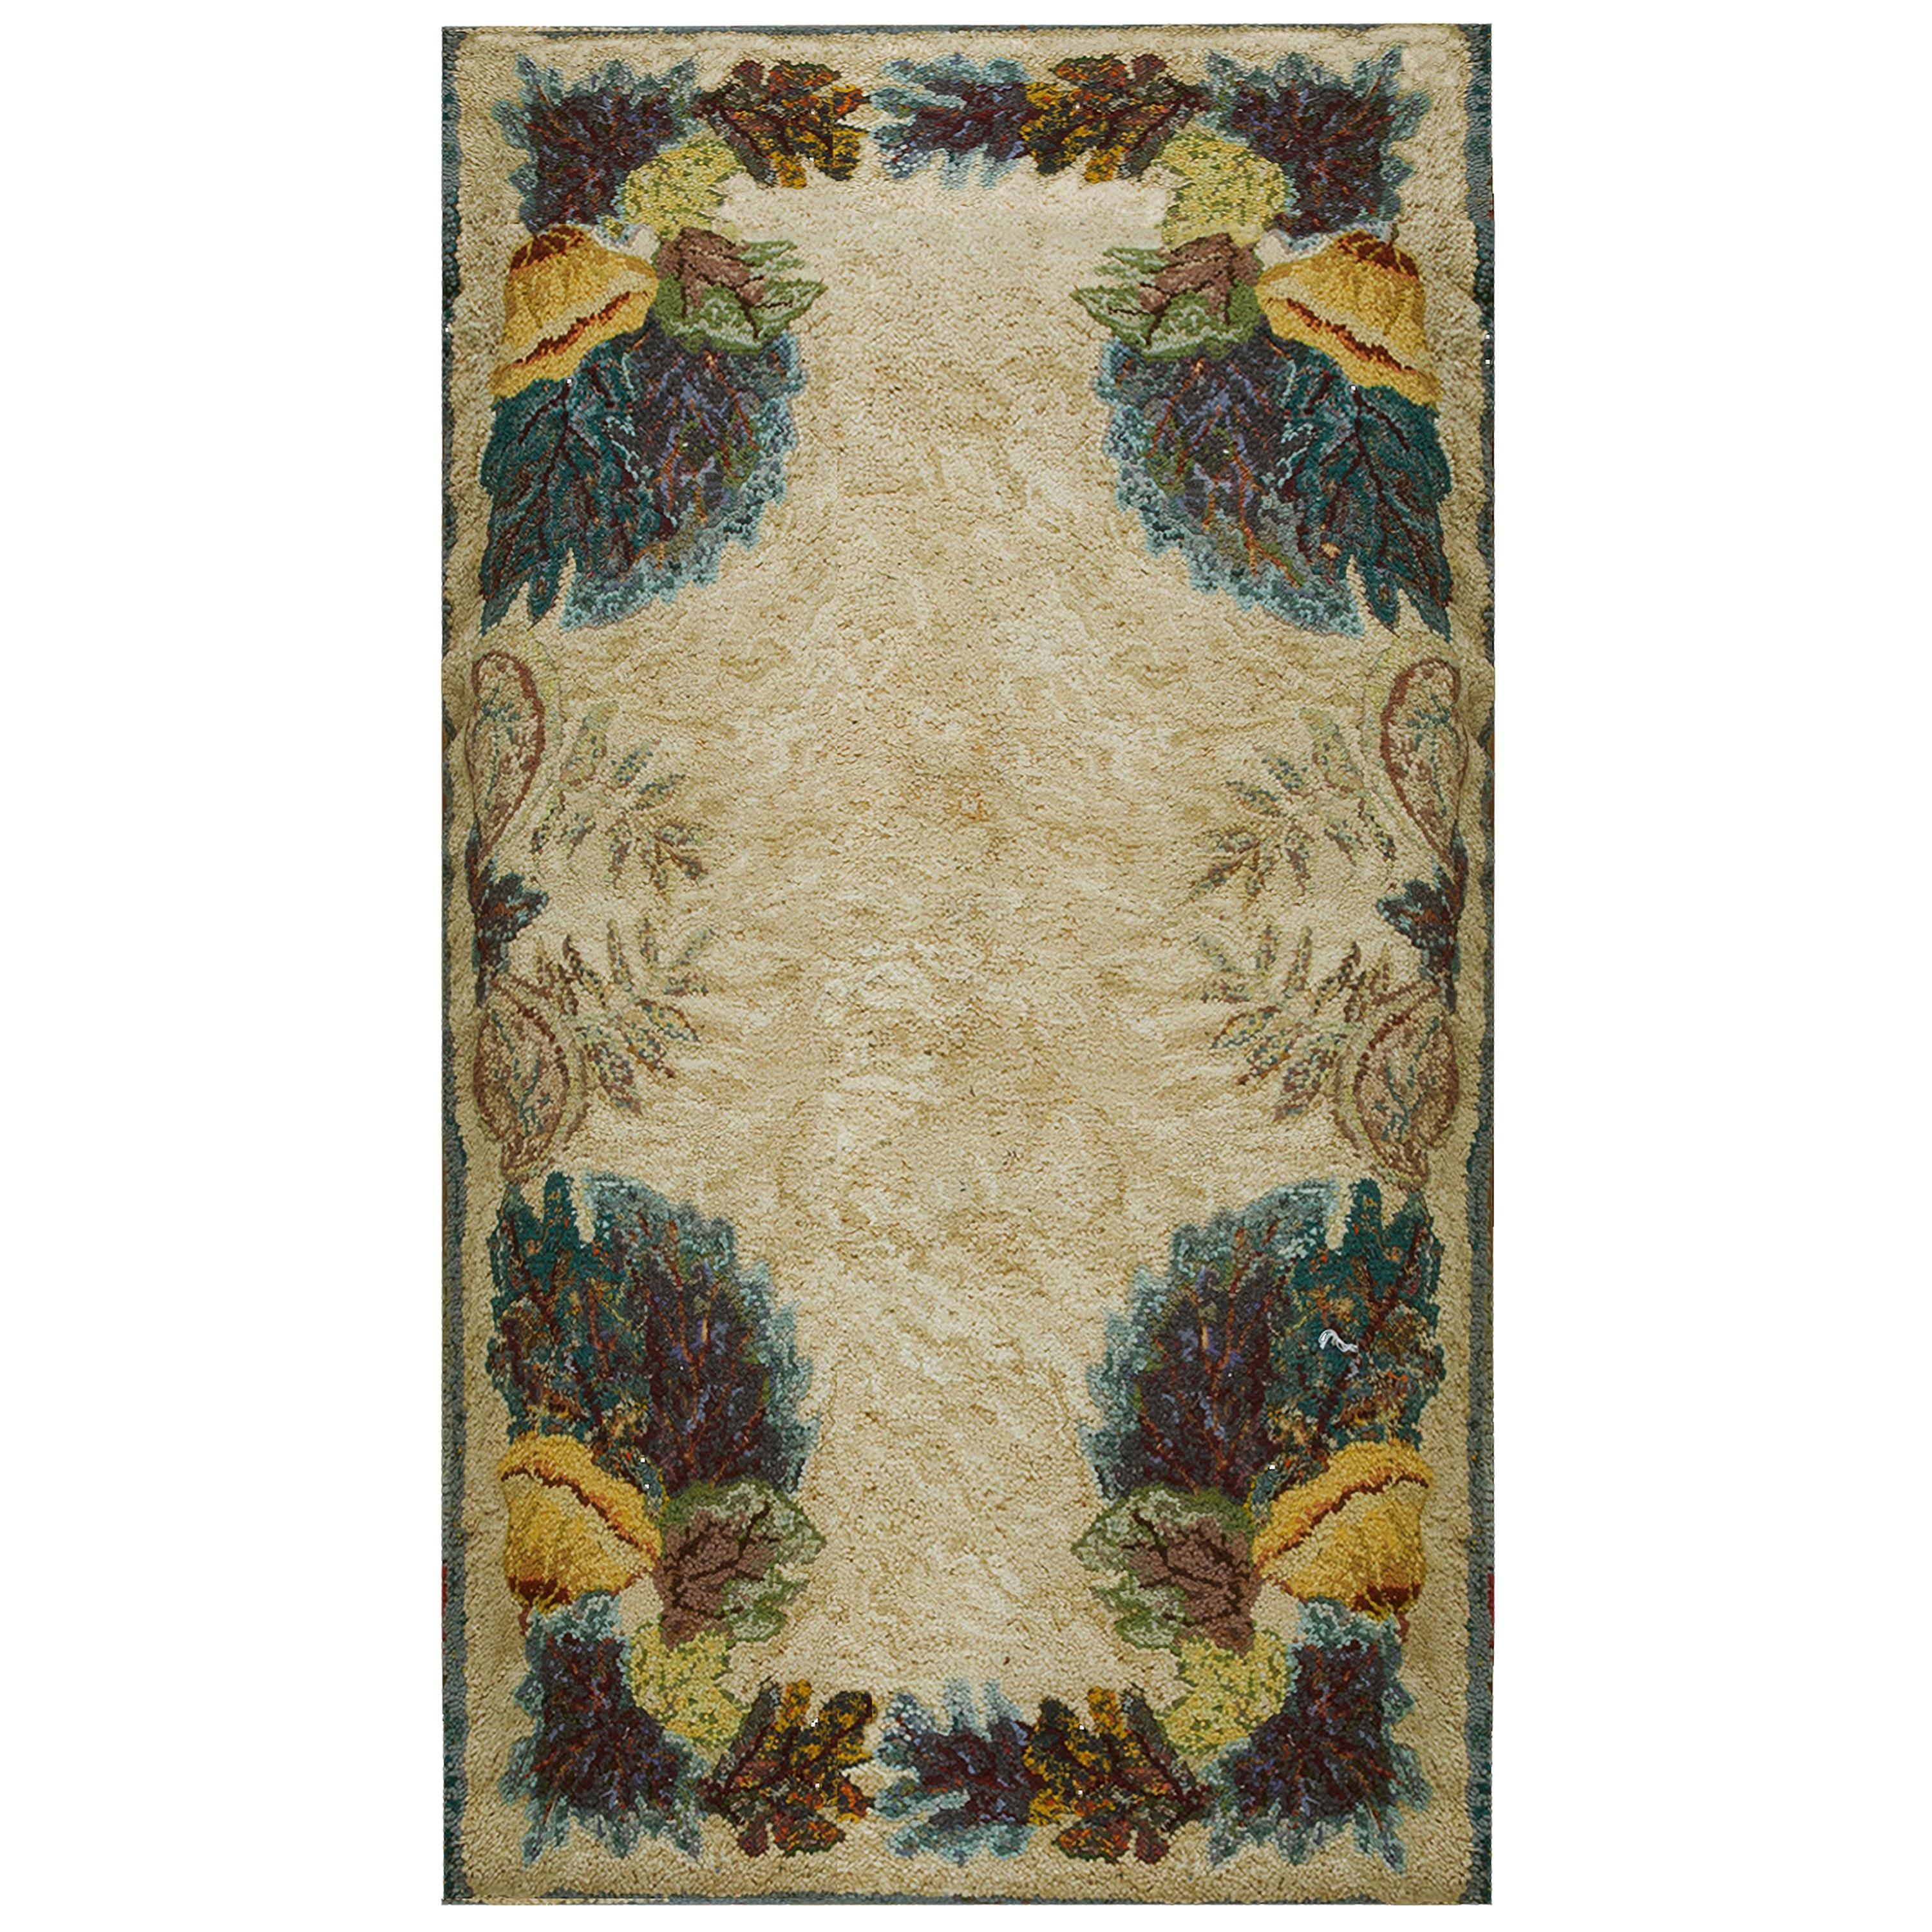 Early 20th Century American Hooked Rug ( 2'10" x 4'9" - 86 x 144 cm ) For Sale